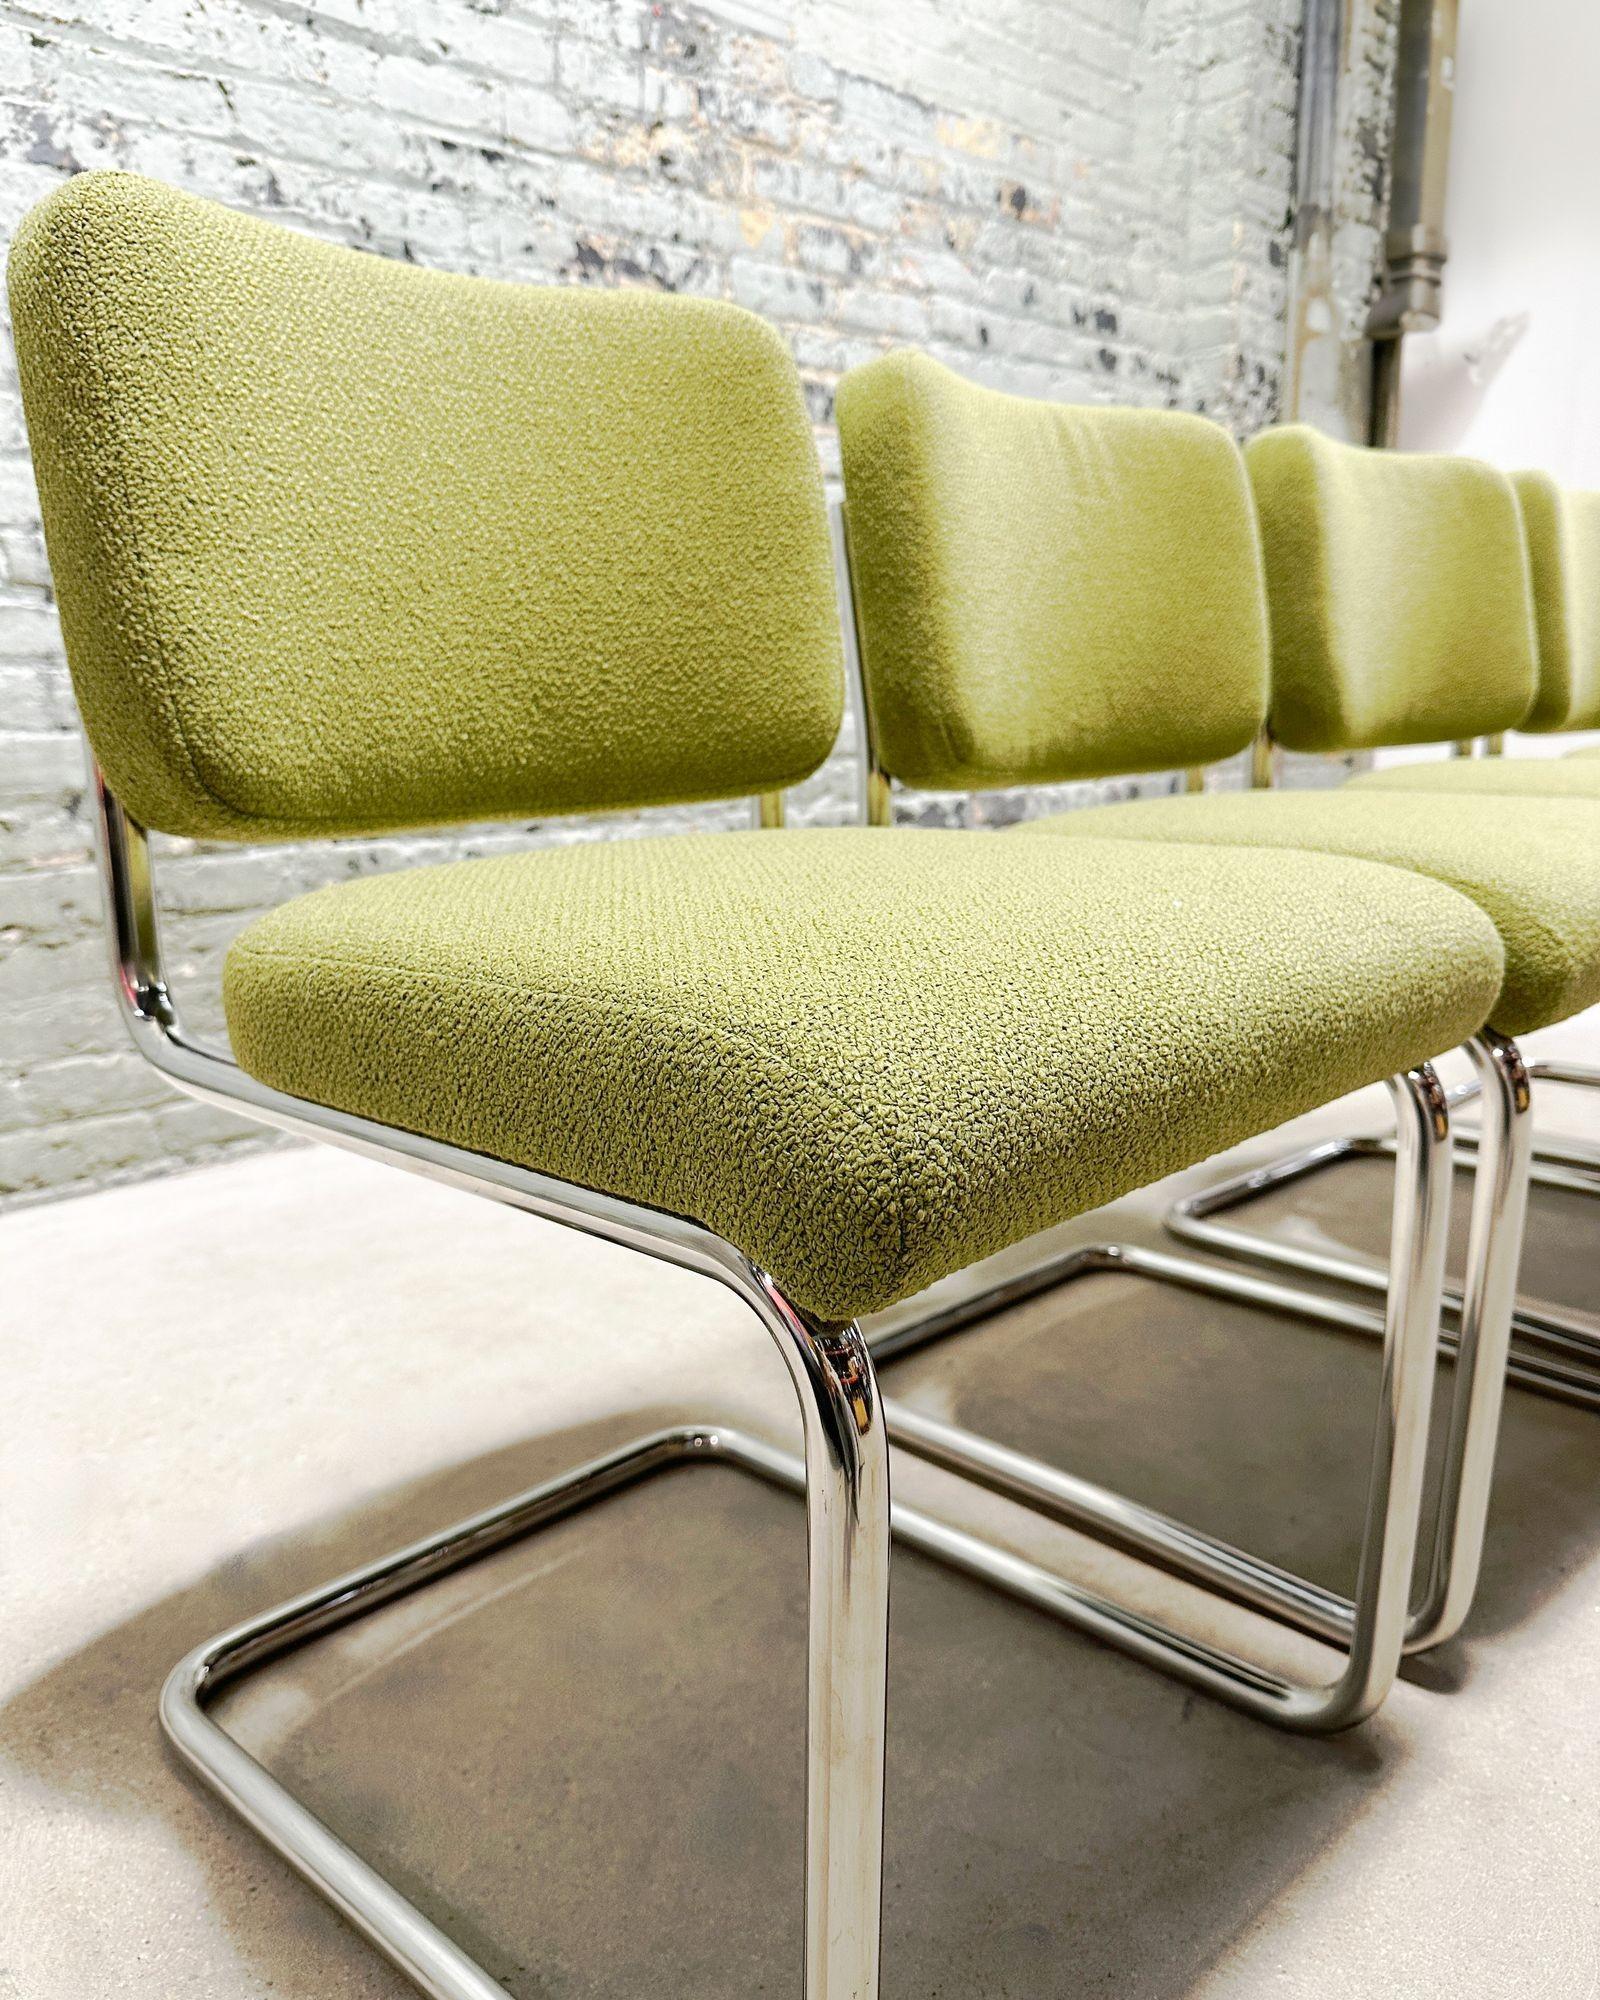 Marcel Breuer for Knoll Cesca Side/Dining Chairs, 1980. Newly reupholstered green boucle.
We have a large quantity of these chairs. You are welcome to send your own COM and we will reupholster at no additional charge
Chairs Measure 32